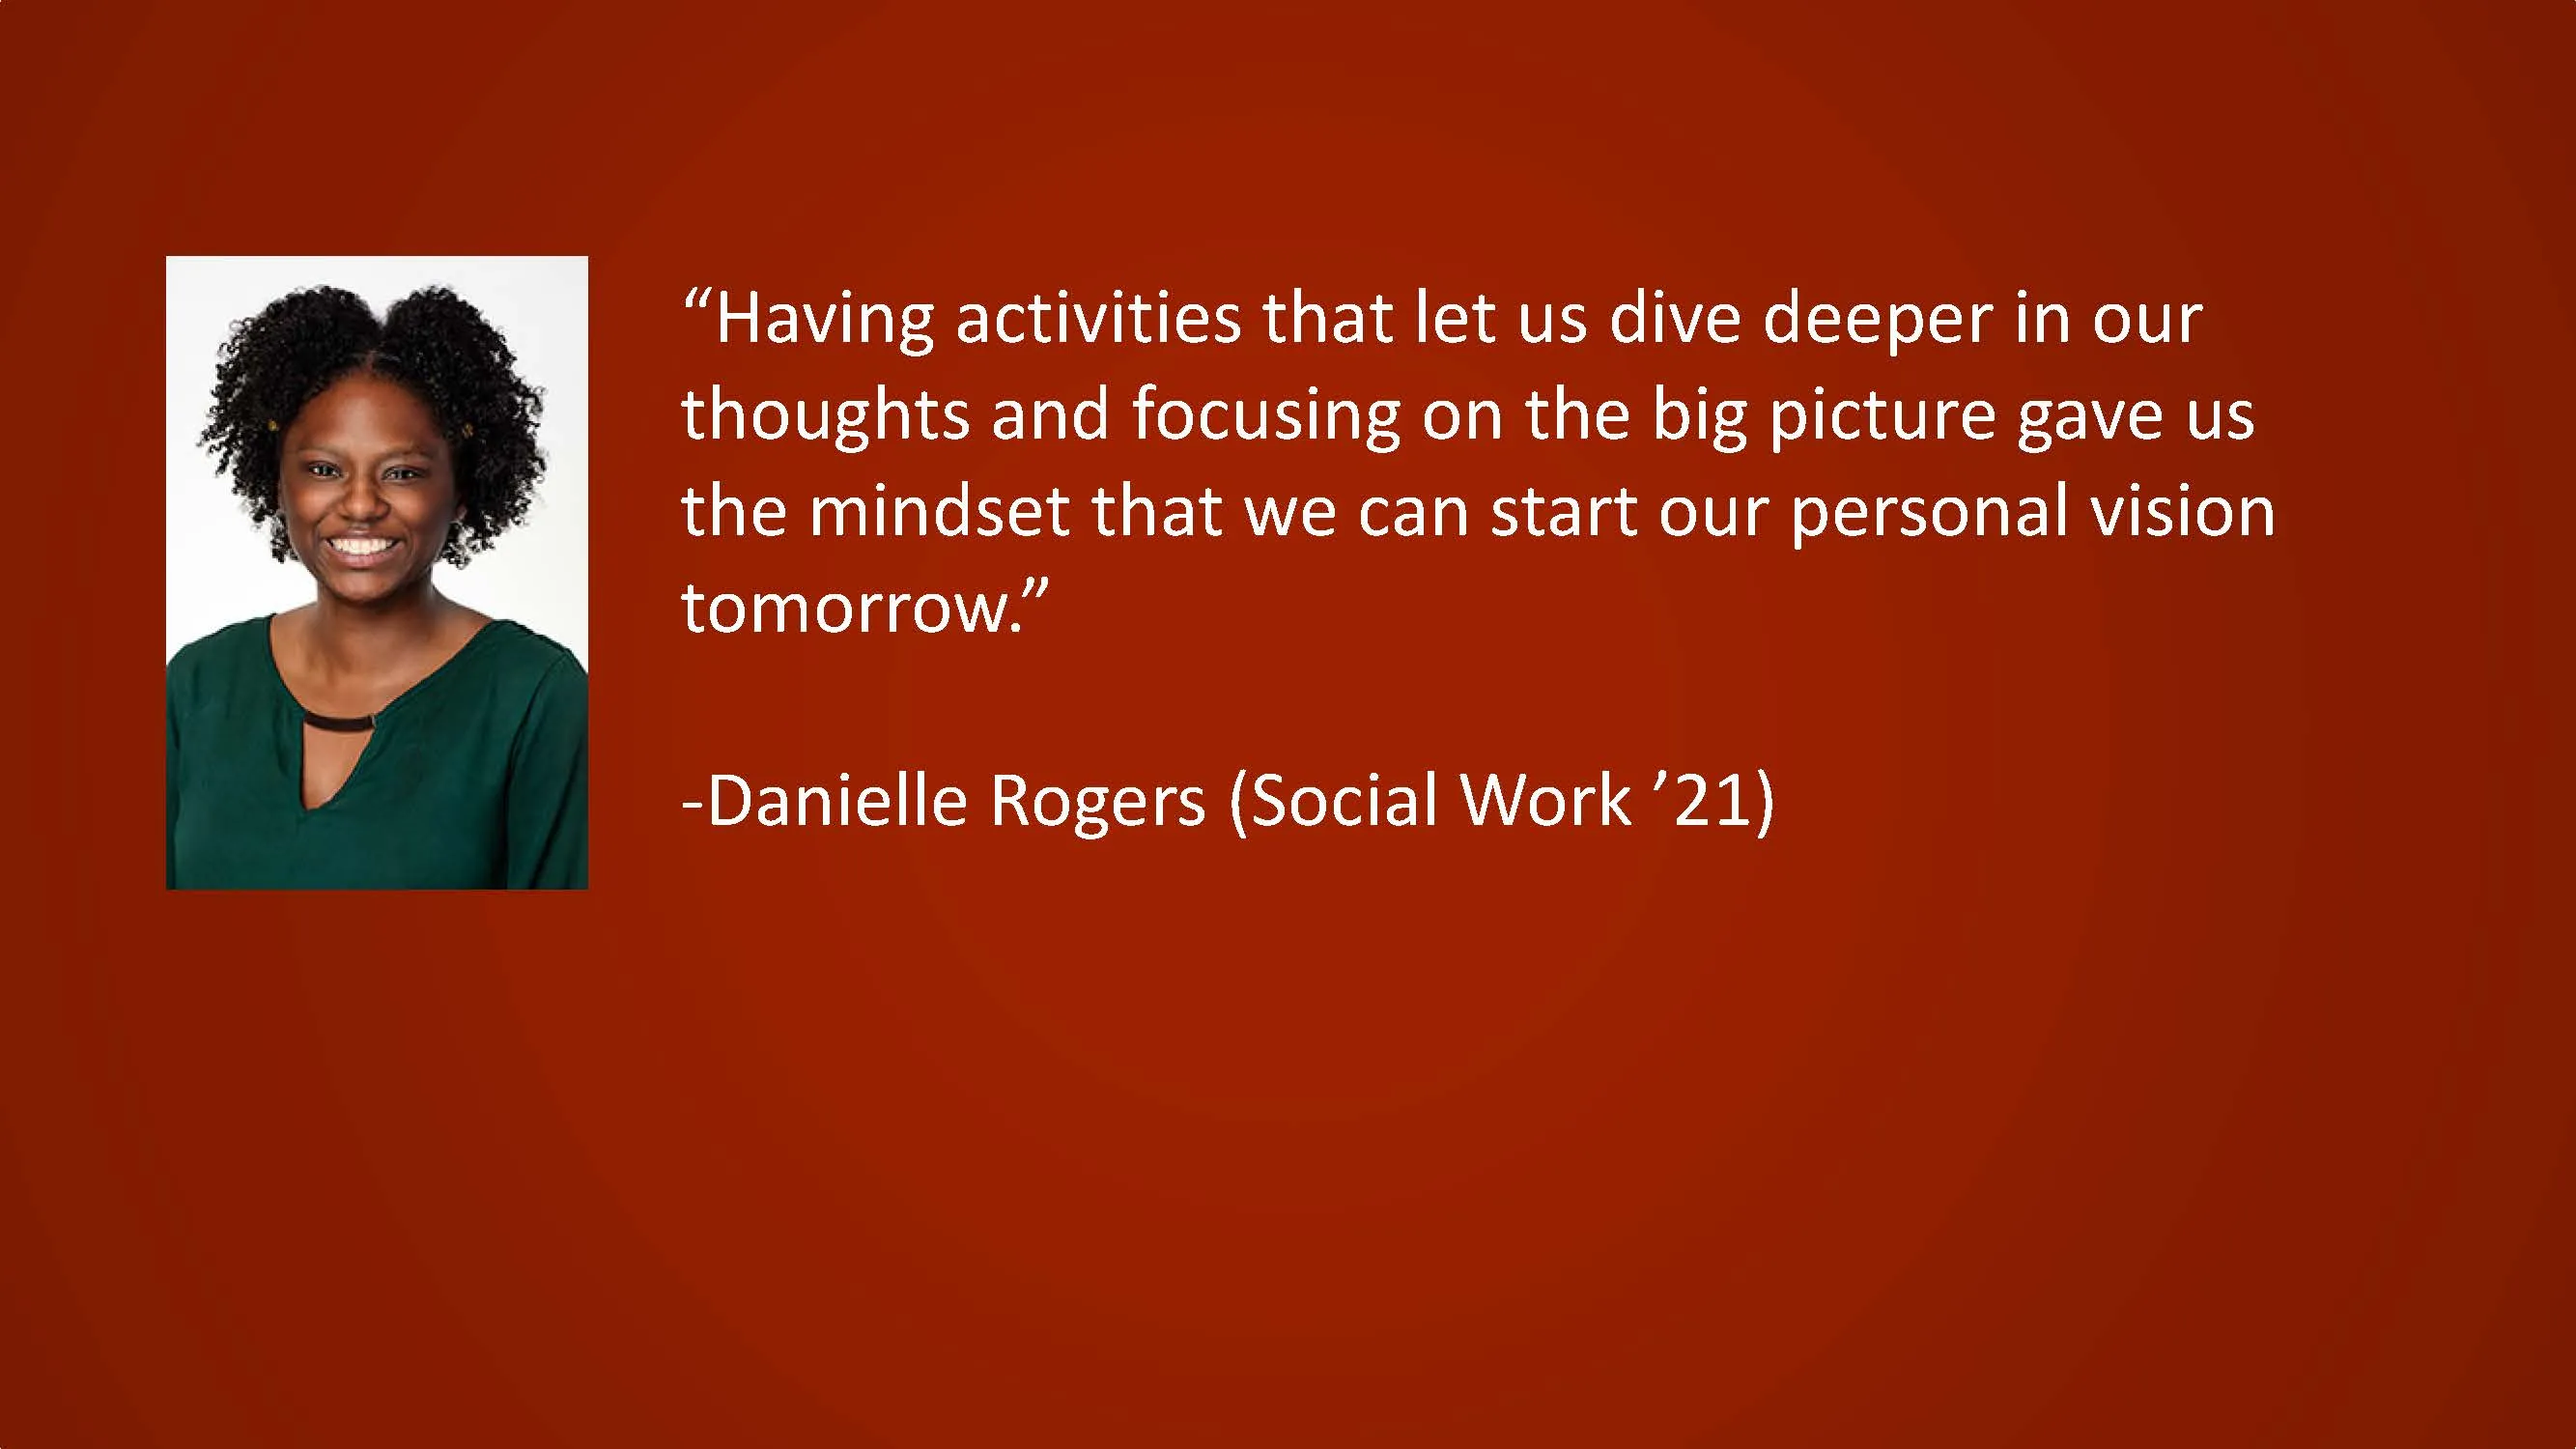 Having activities that let us dive deeper in our thoughts and focusing on the big picture gave us the mindset that we can start our personal vision tomorrow. — Danielle Rogers (Social Work '21)